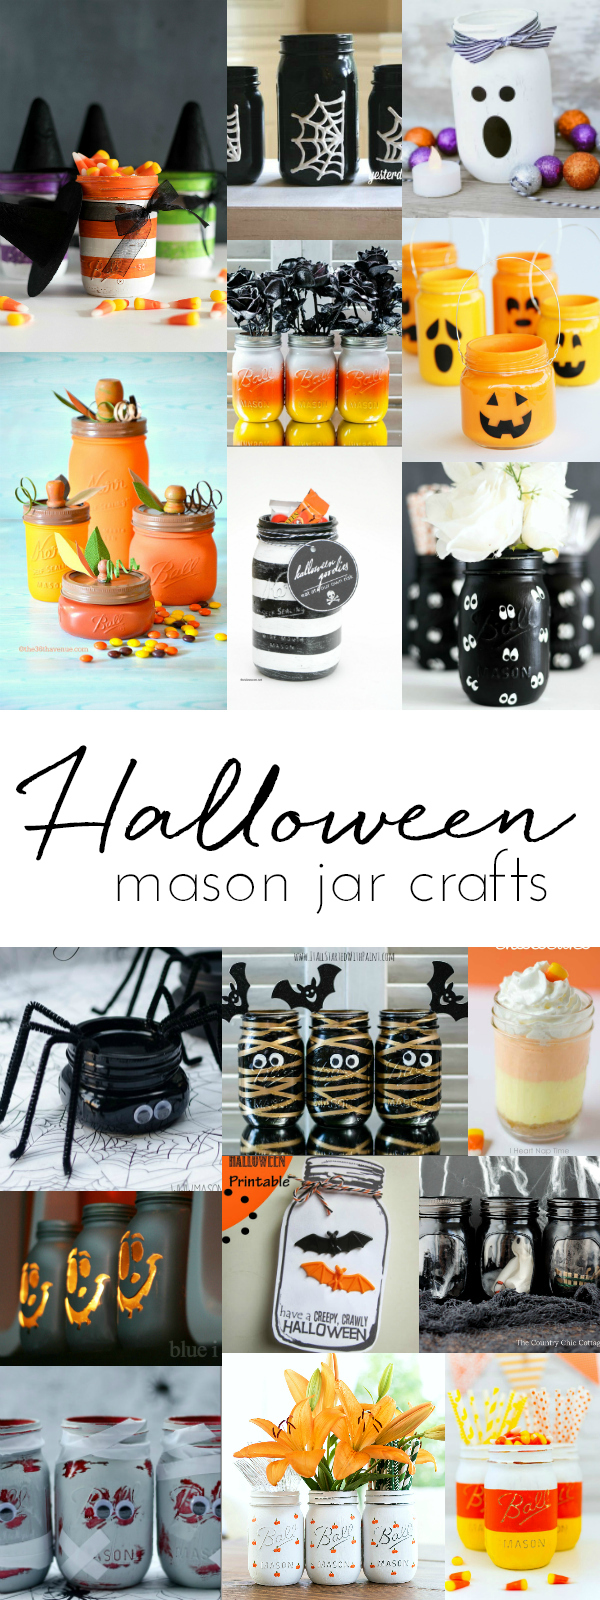 45+ Easy Halloween Crafts — Best DIY Craft Project Ideas for Halloween